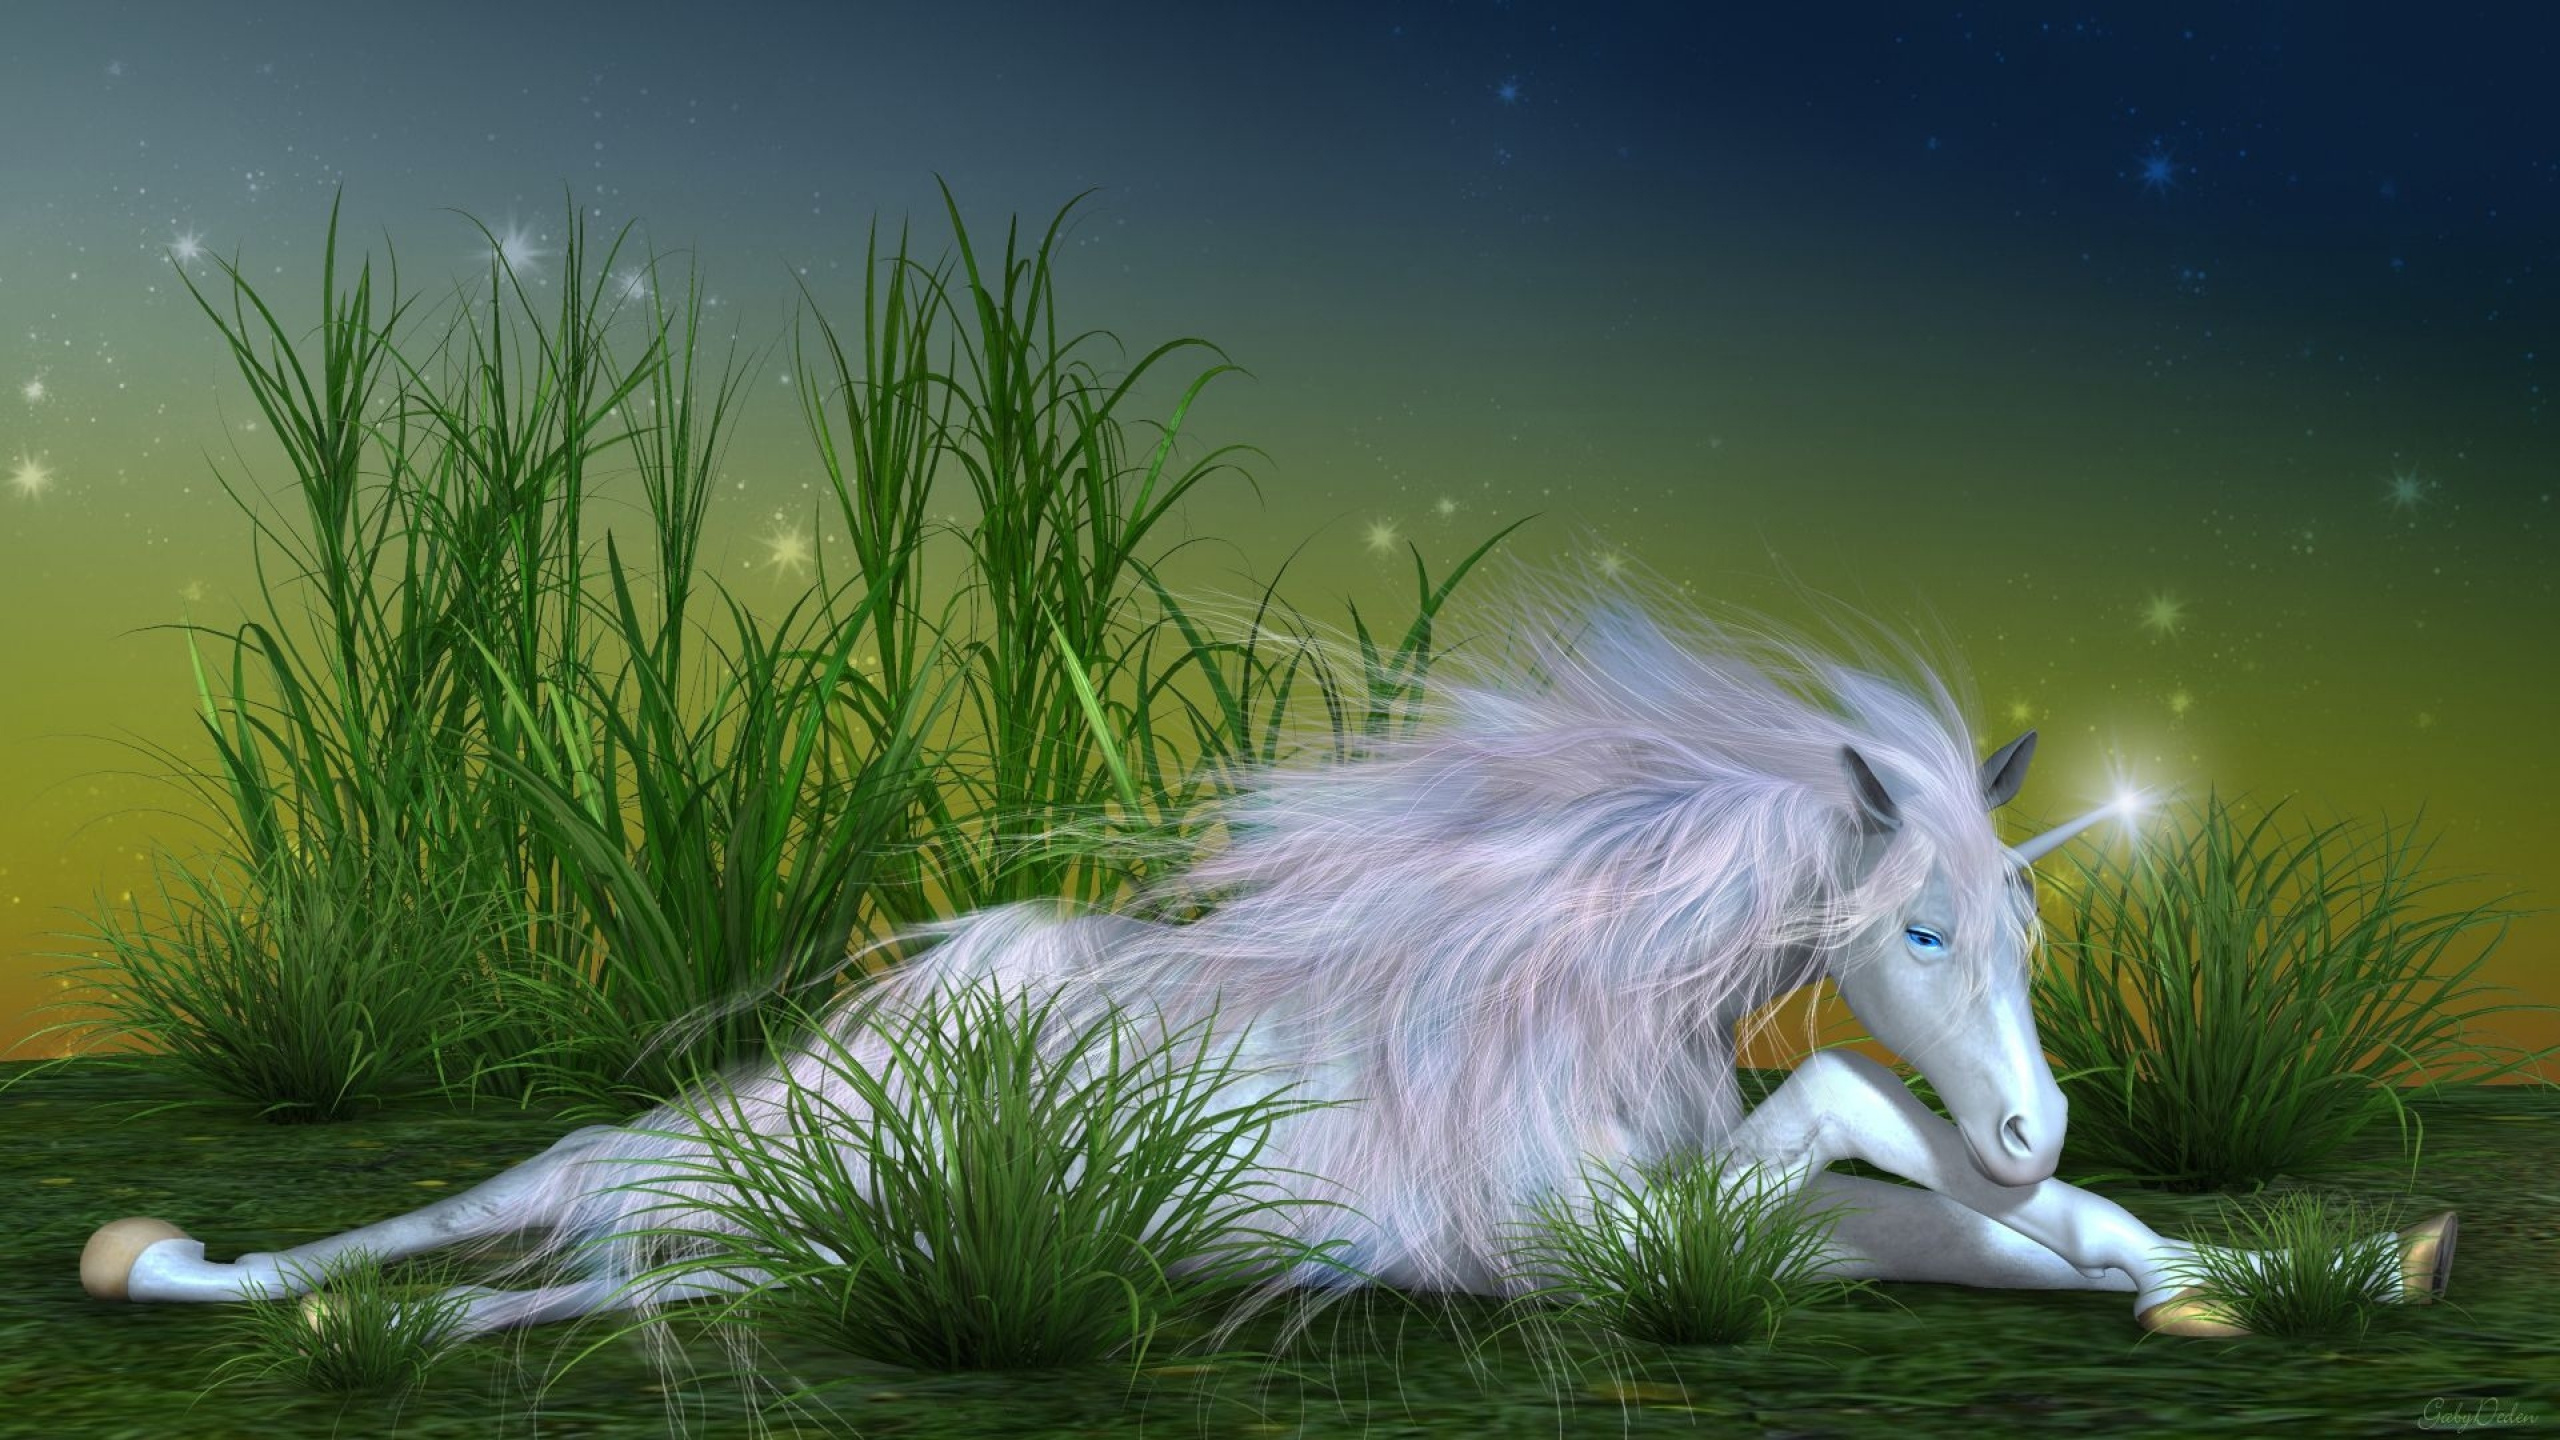 White Long Haired Animal on Green Grass. Wallpaper in 2560x1440 Resolution